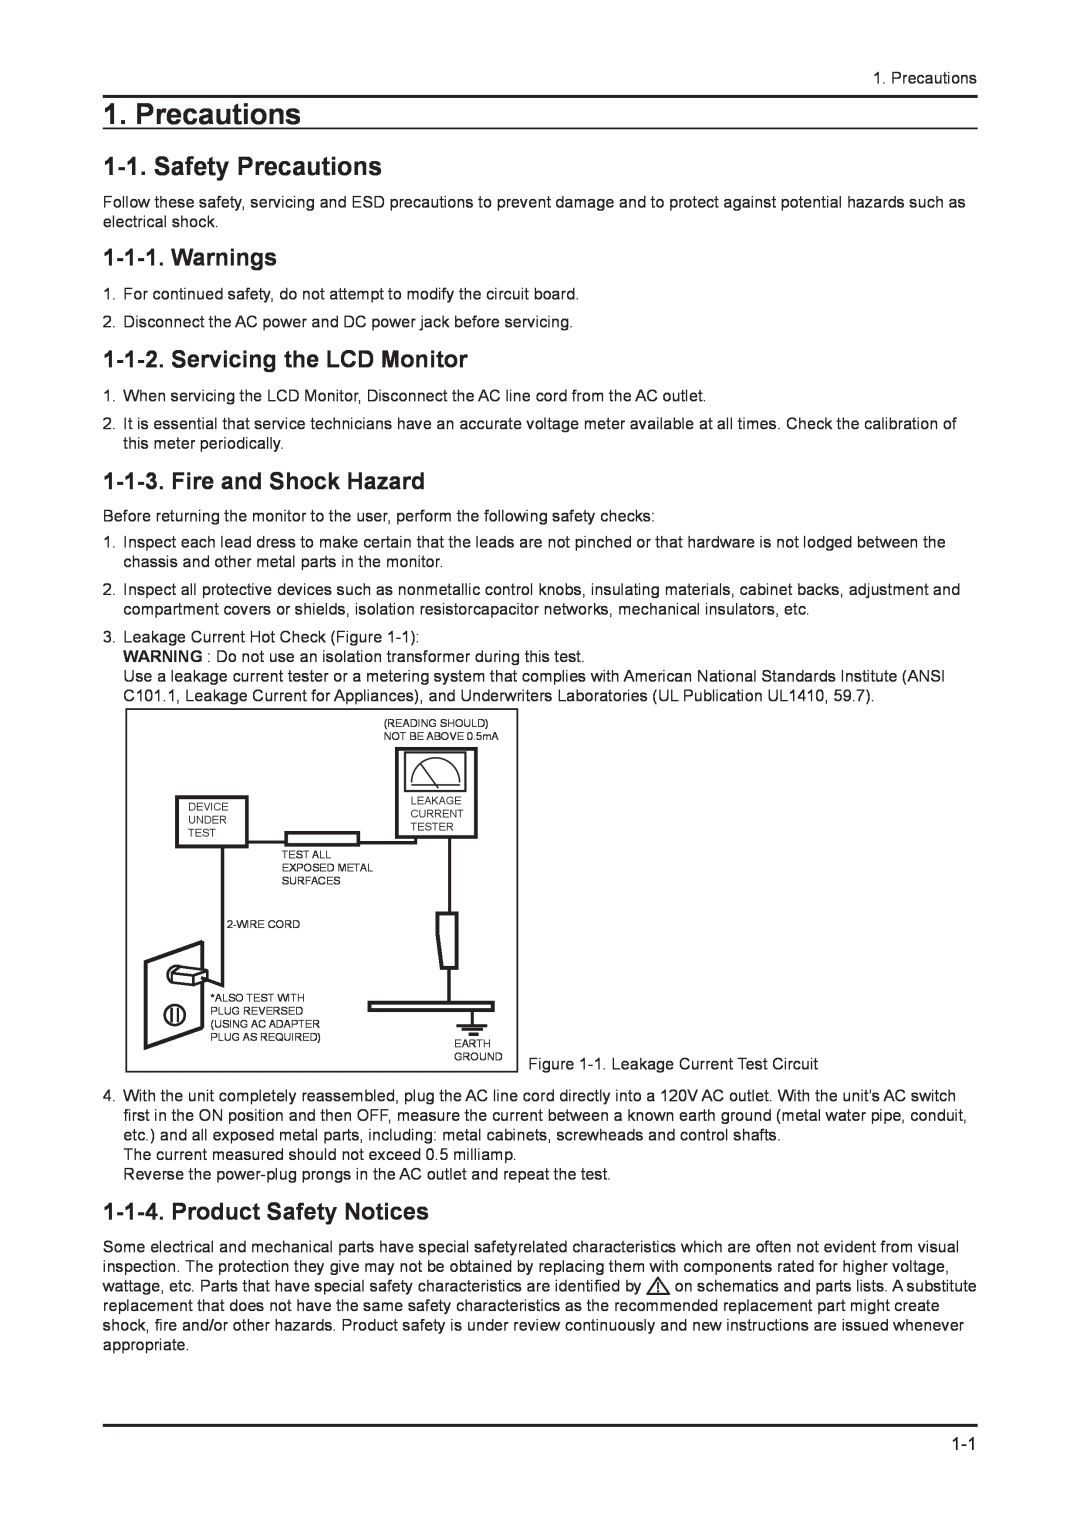 Samsung 943NW Safety Precautions, Warnings, Servicing the LCD Monitor, Fire and Shock Hazard, Product Safety Notices 